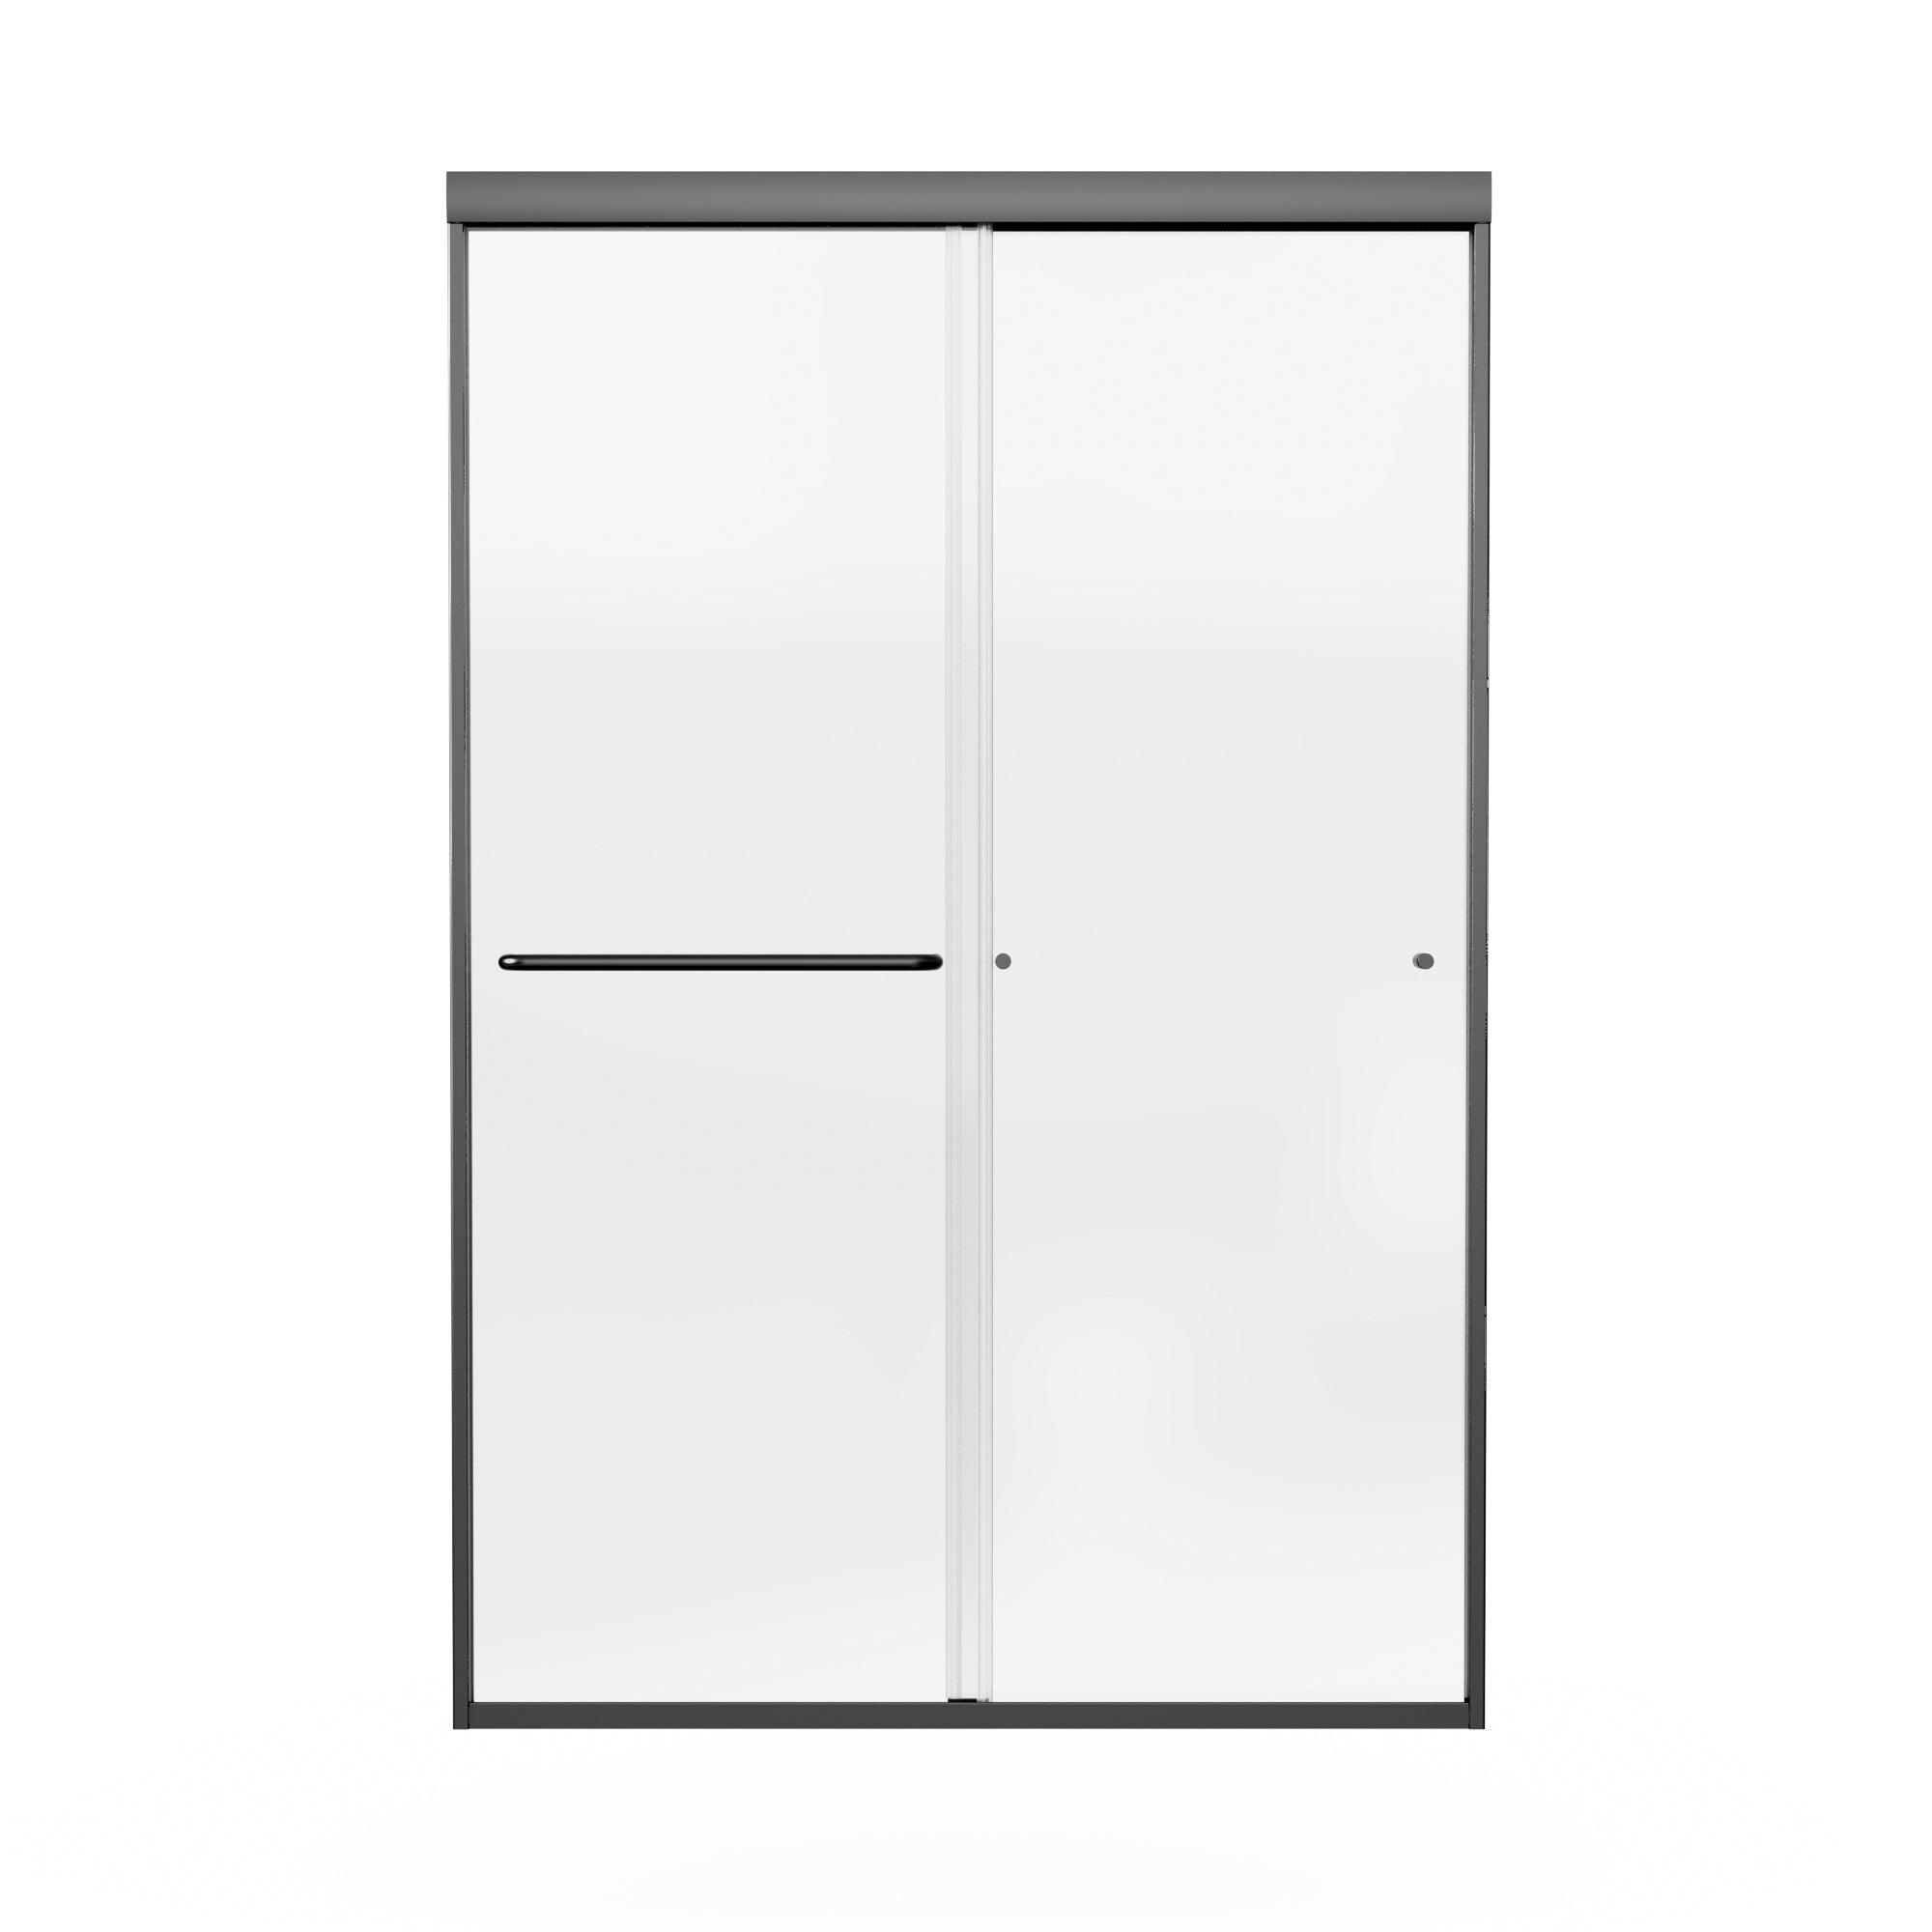 48 in. W x 72 in. H Sliding Framed Shower Door Finish with Clear Glass-Arrisea